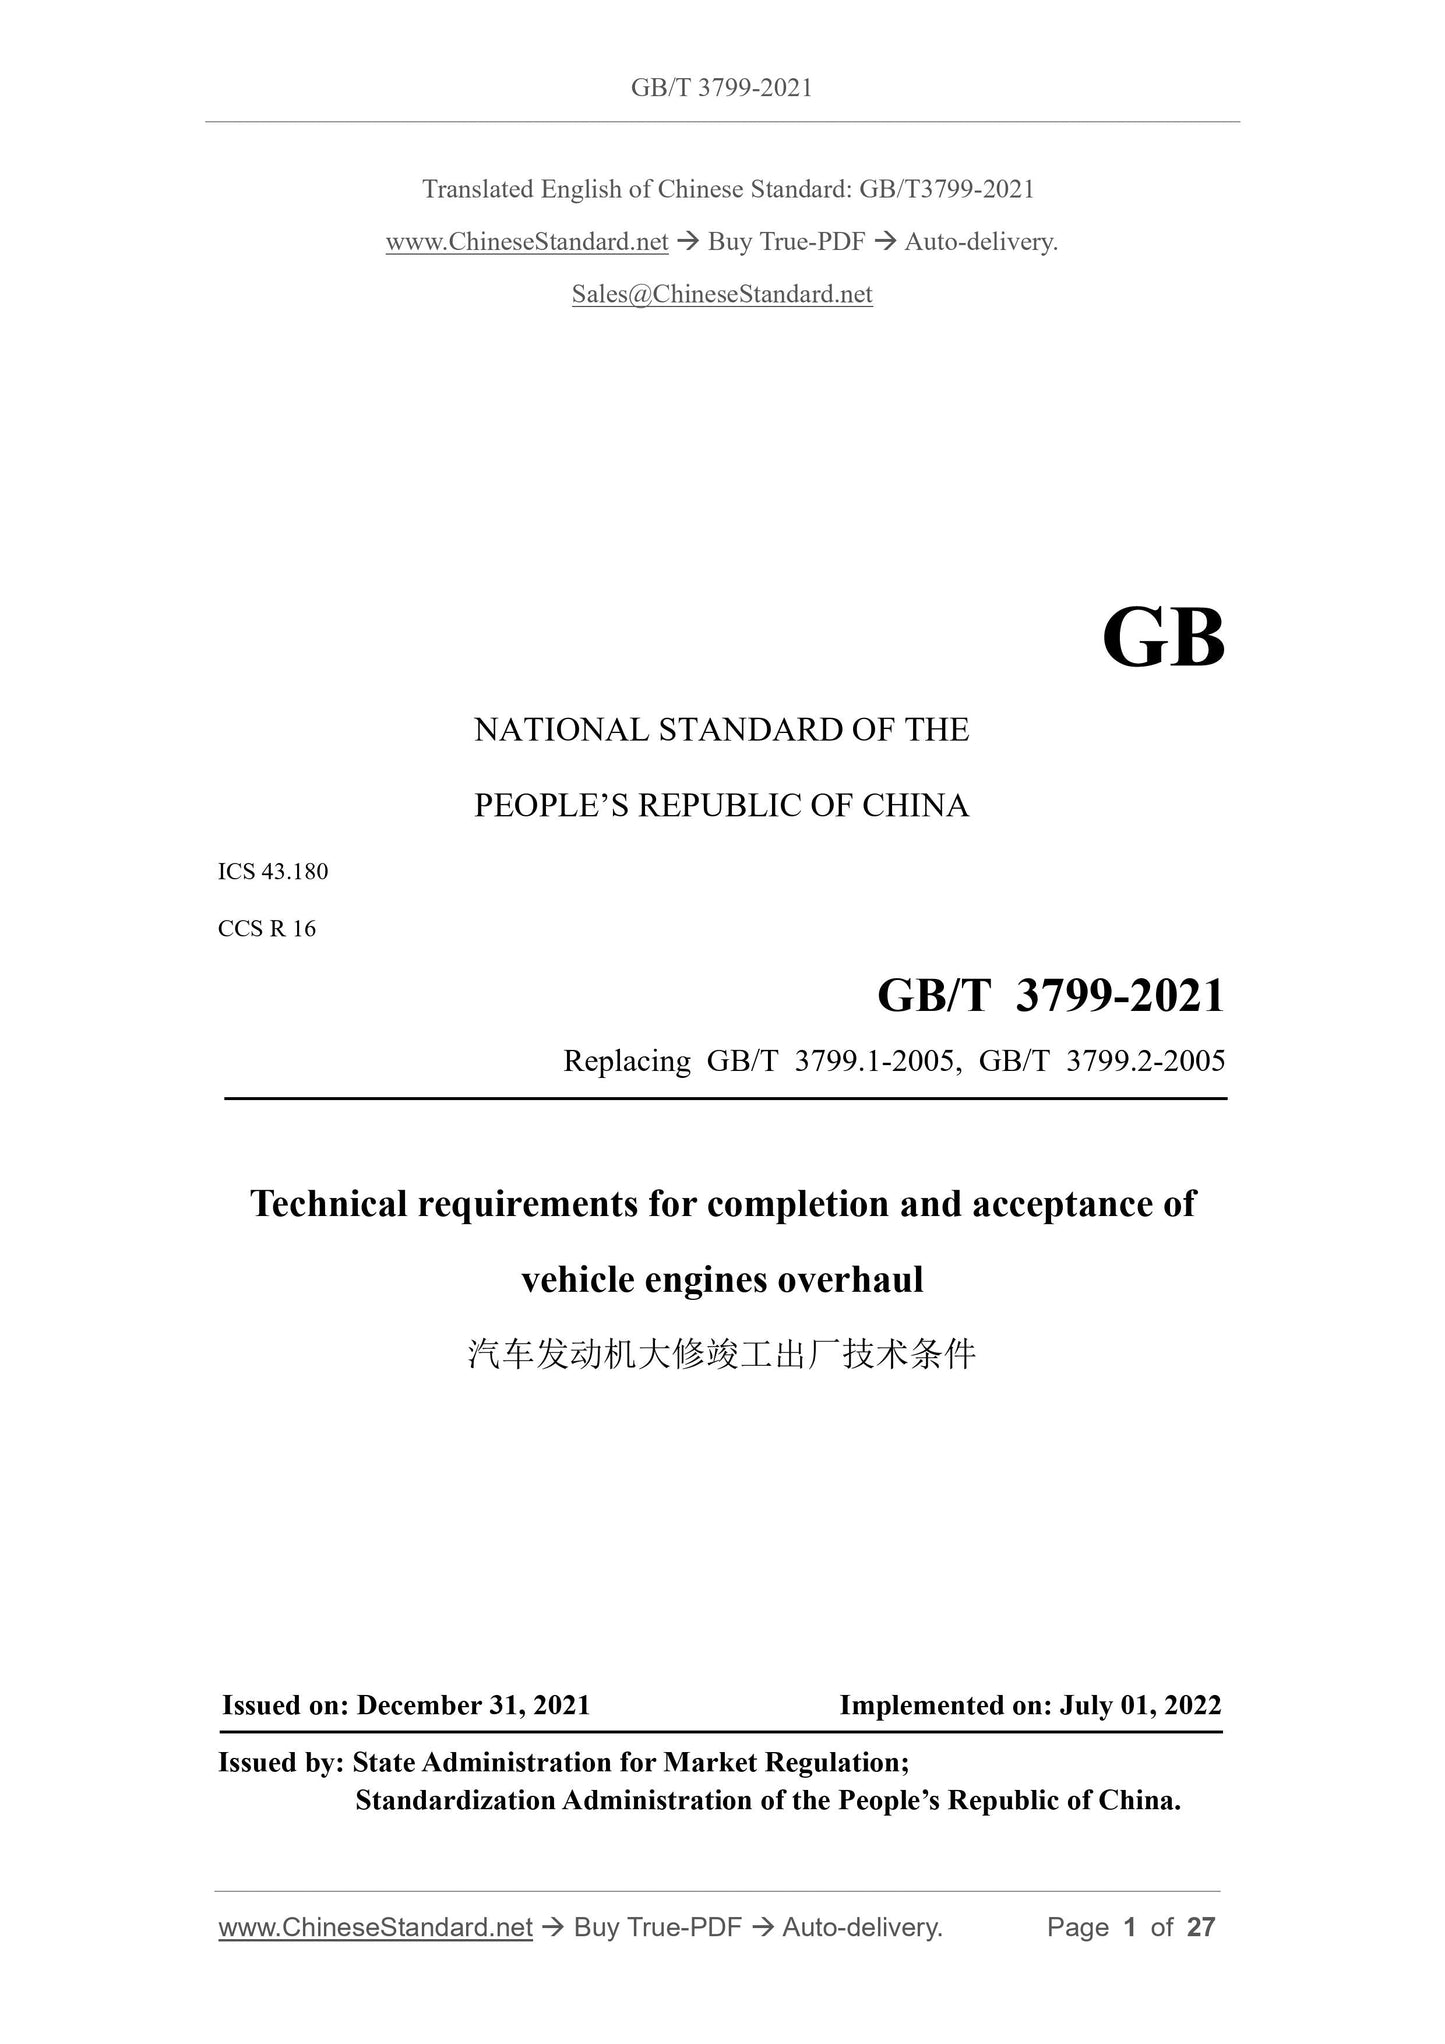 GB/T 3799-2021 Page 1